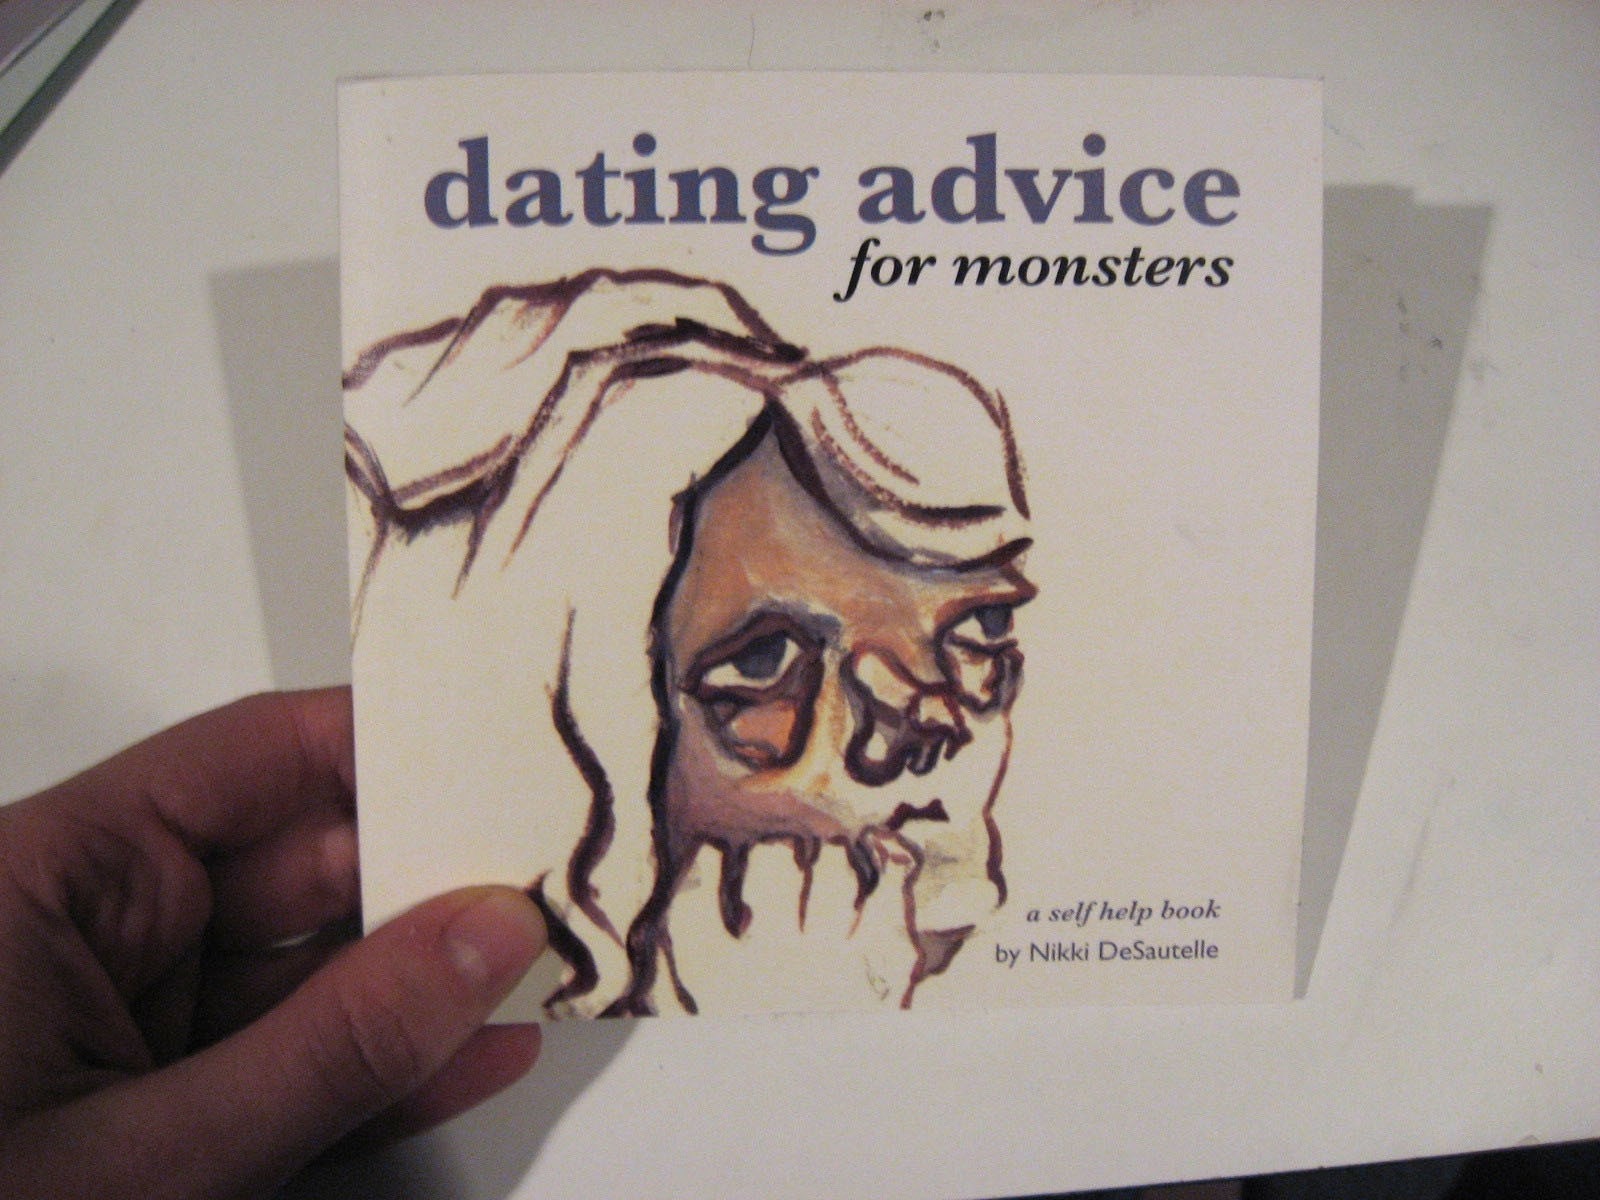 dating advice com. Dating Advice for Monsters It says 